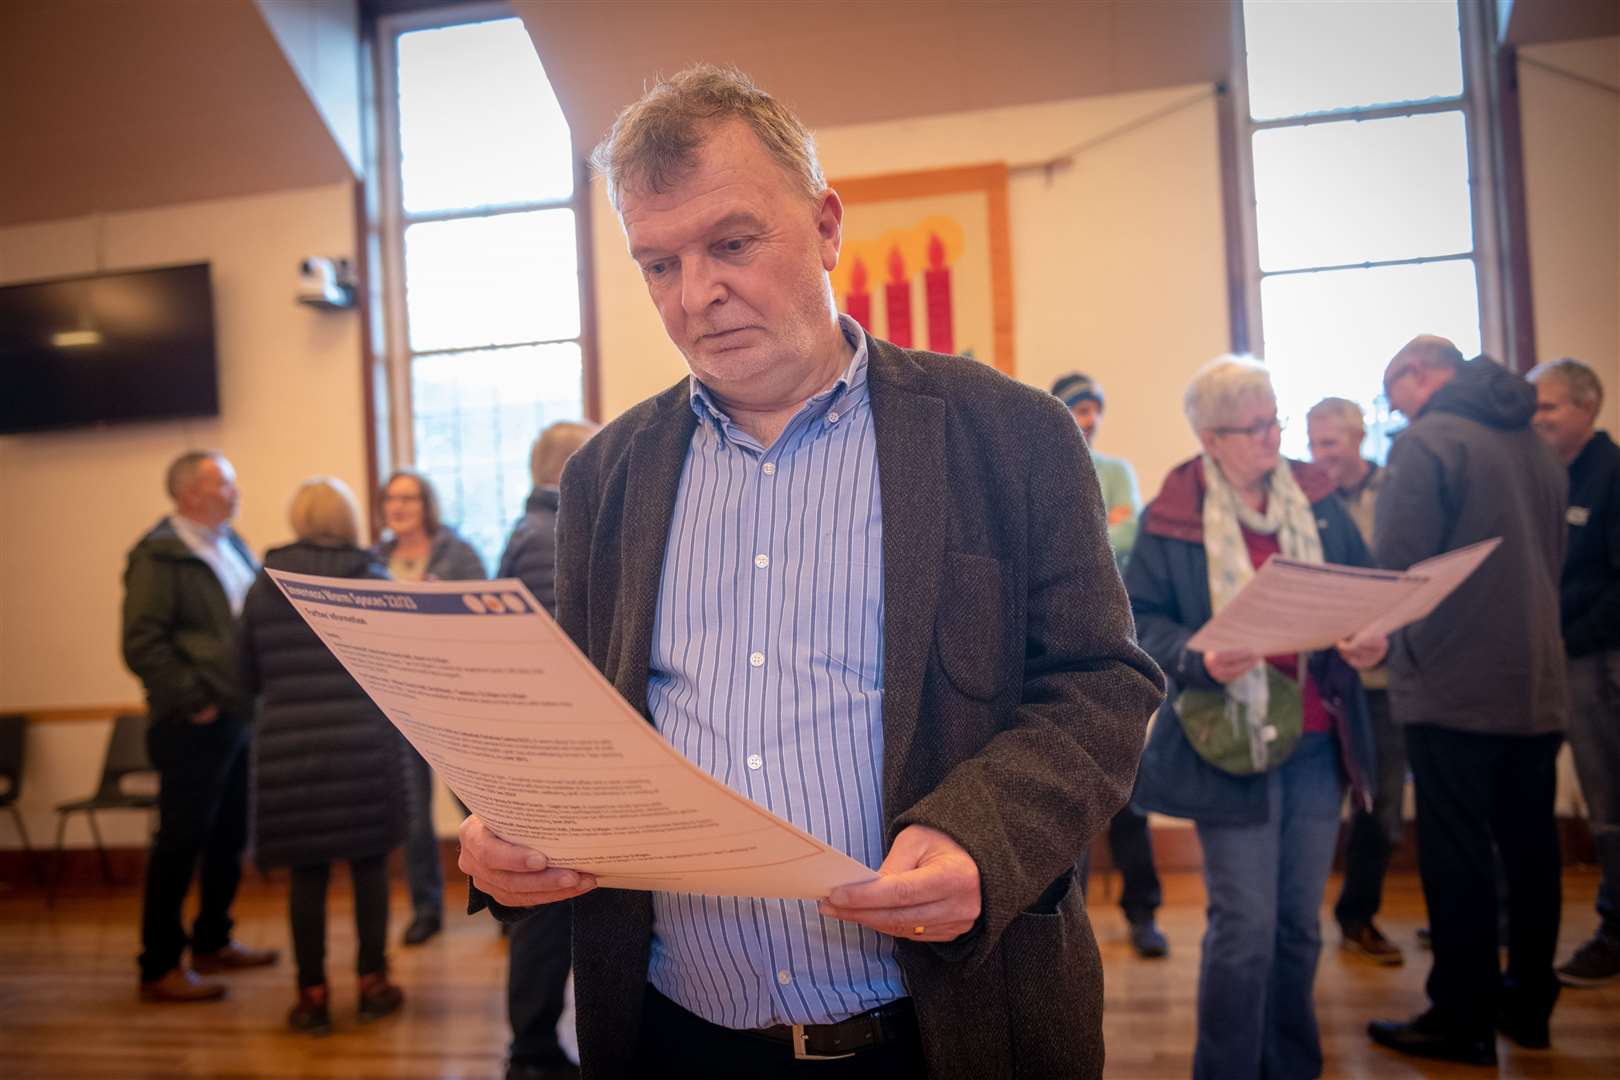 Alasdair Christie checks out the list of warm spaces in Inverness during the launch at Hilton Church.